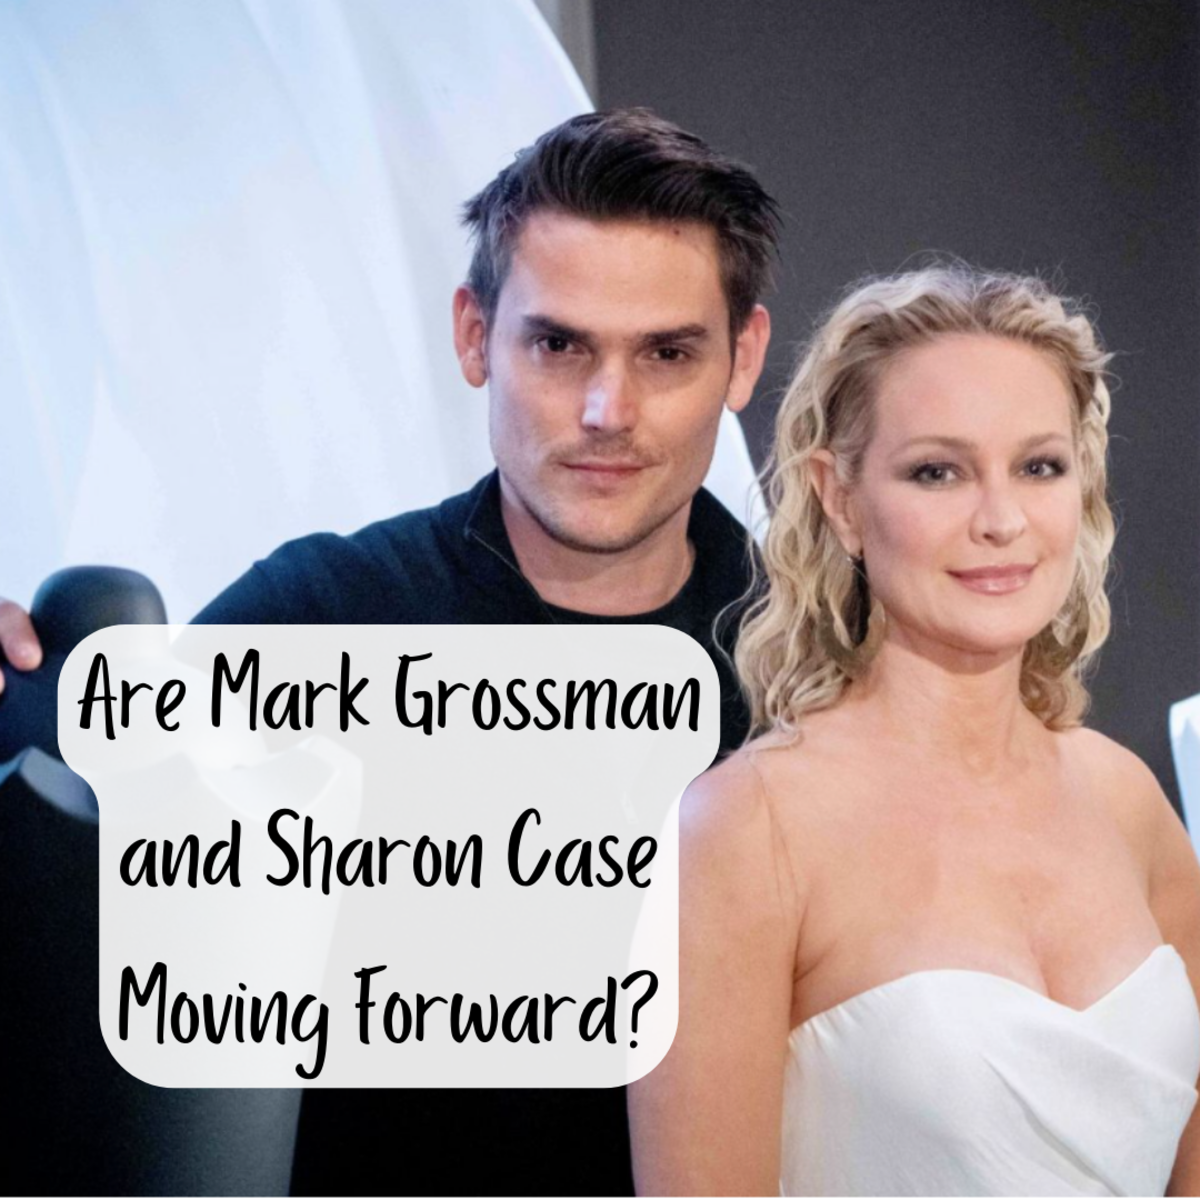 Read on to learn all about Mark Grossman and Sharon Case's off-screen romance.